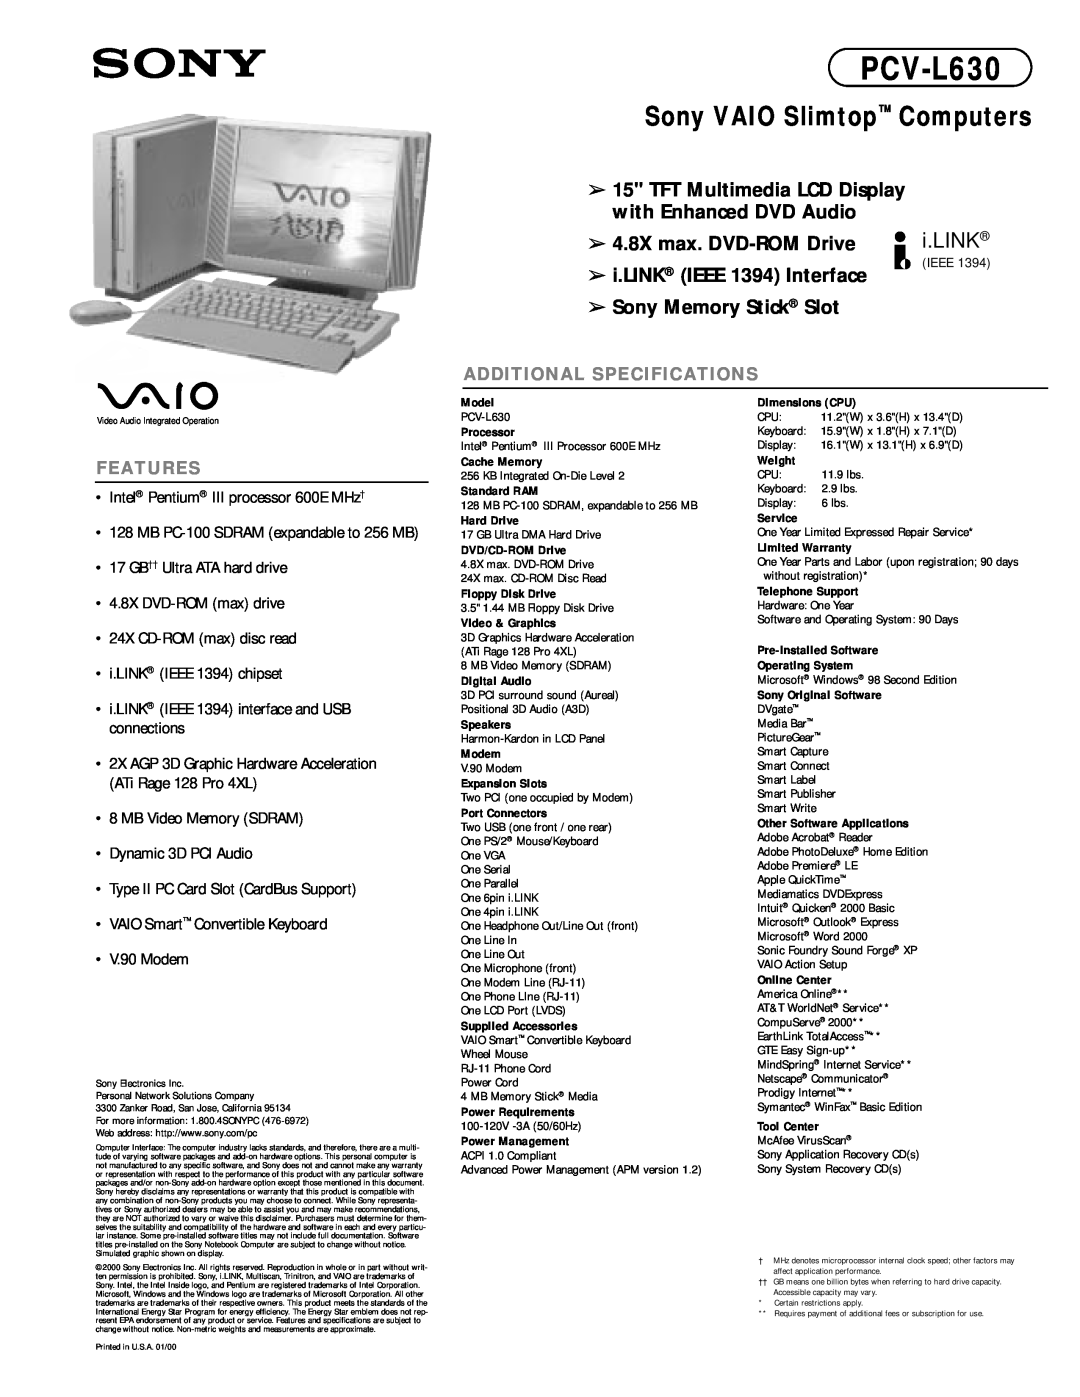 Sony PCV-L630 dimensions Sony VAIO Slimtop Computers, 4.8X max. DVD-ROM Drive i.LINK IEEE 1394 Interface, Features 